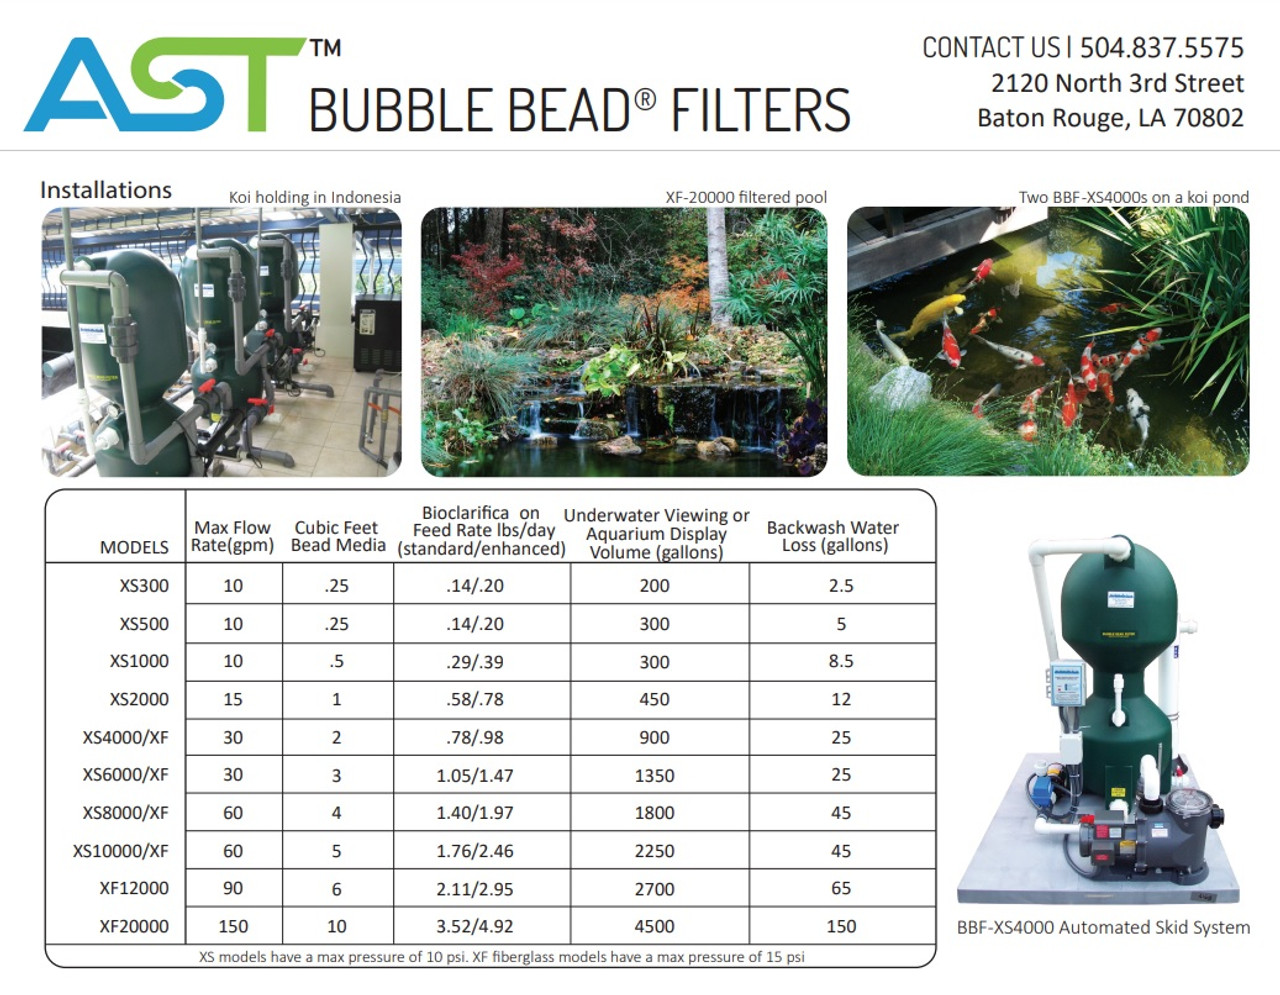 AST Bubble-Washed BBF-XS4000 Bead Filter Skid System w/ UV